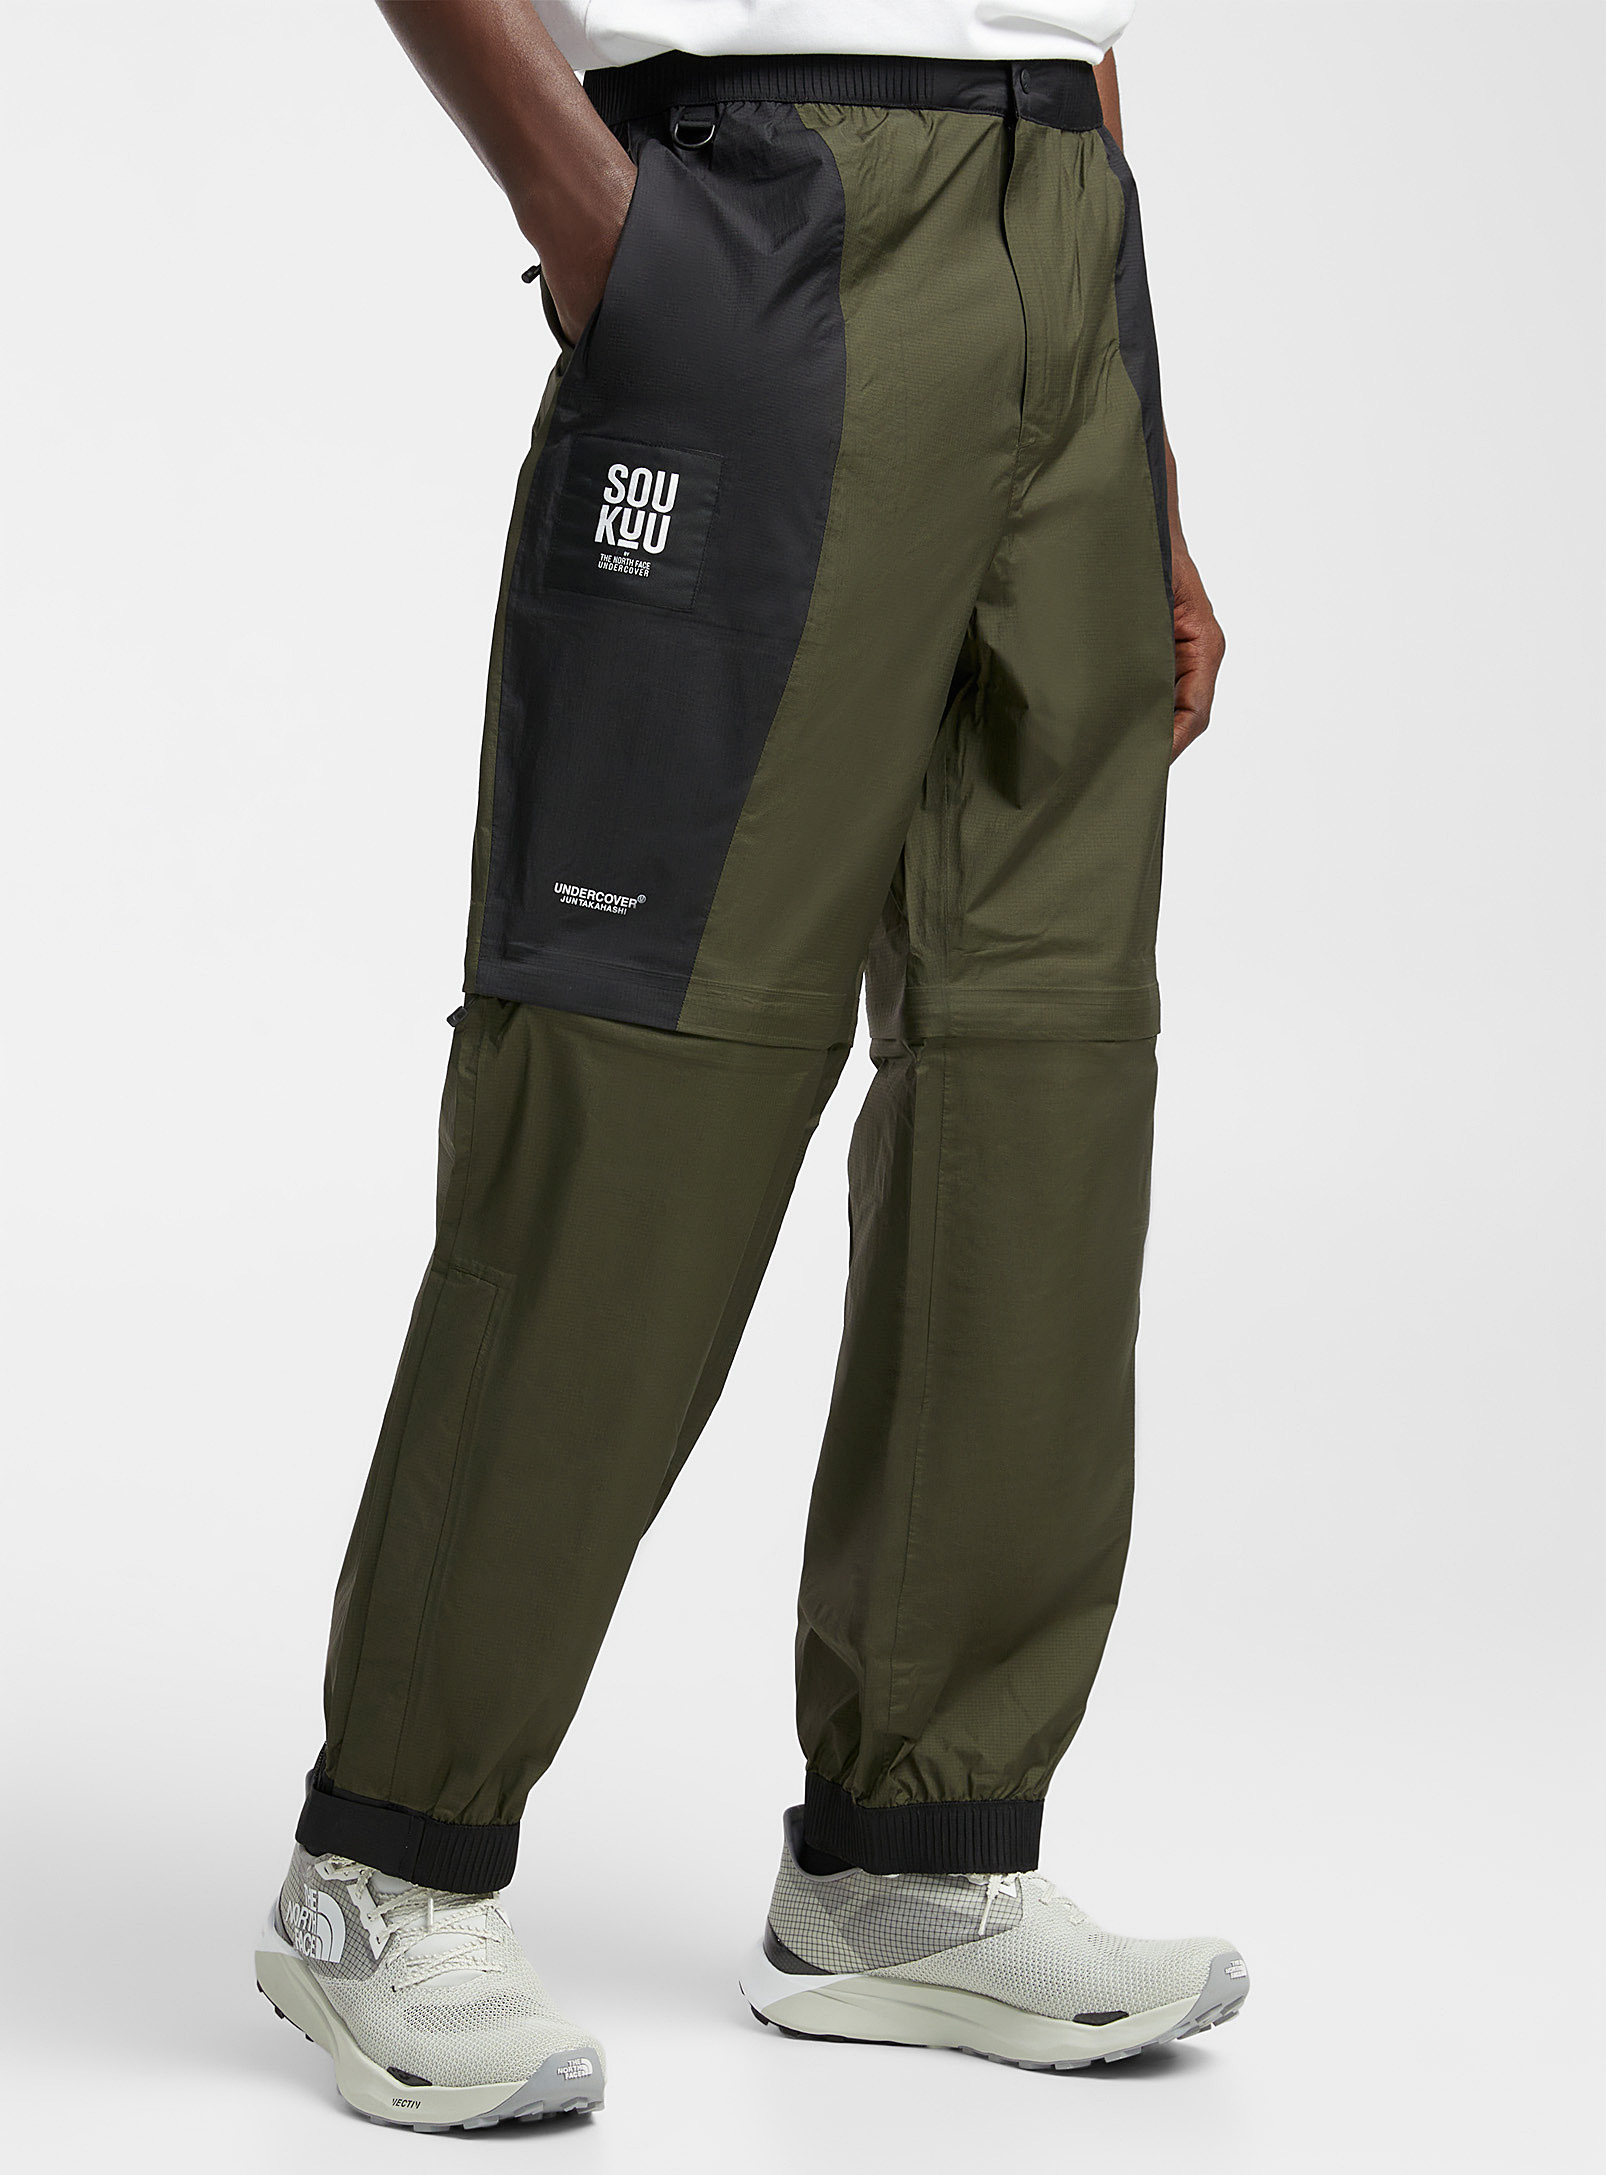 The North Face x Undercover - Men's Soukuu Hike two-tone convertible pant